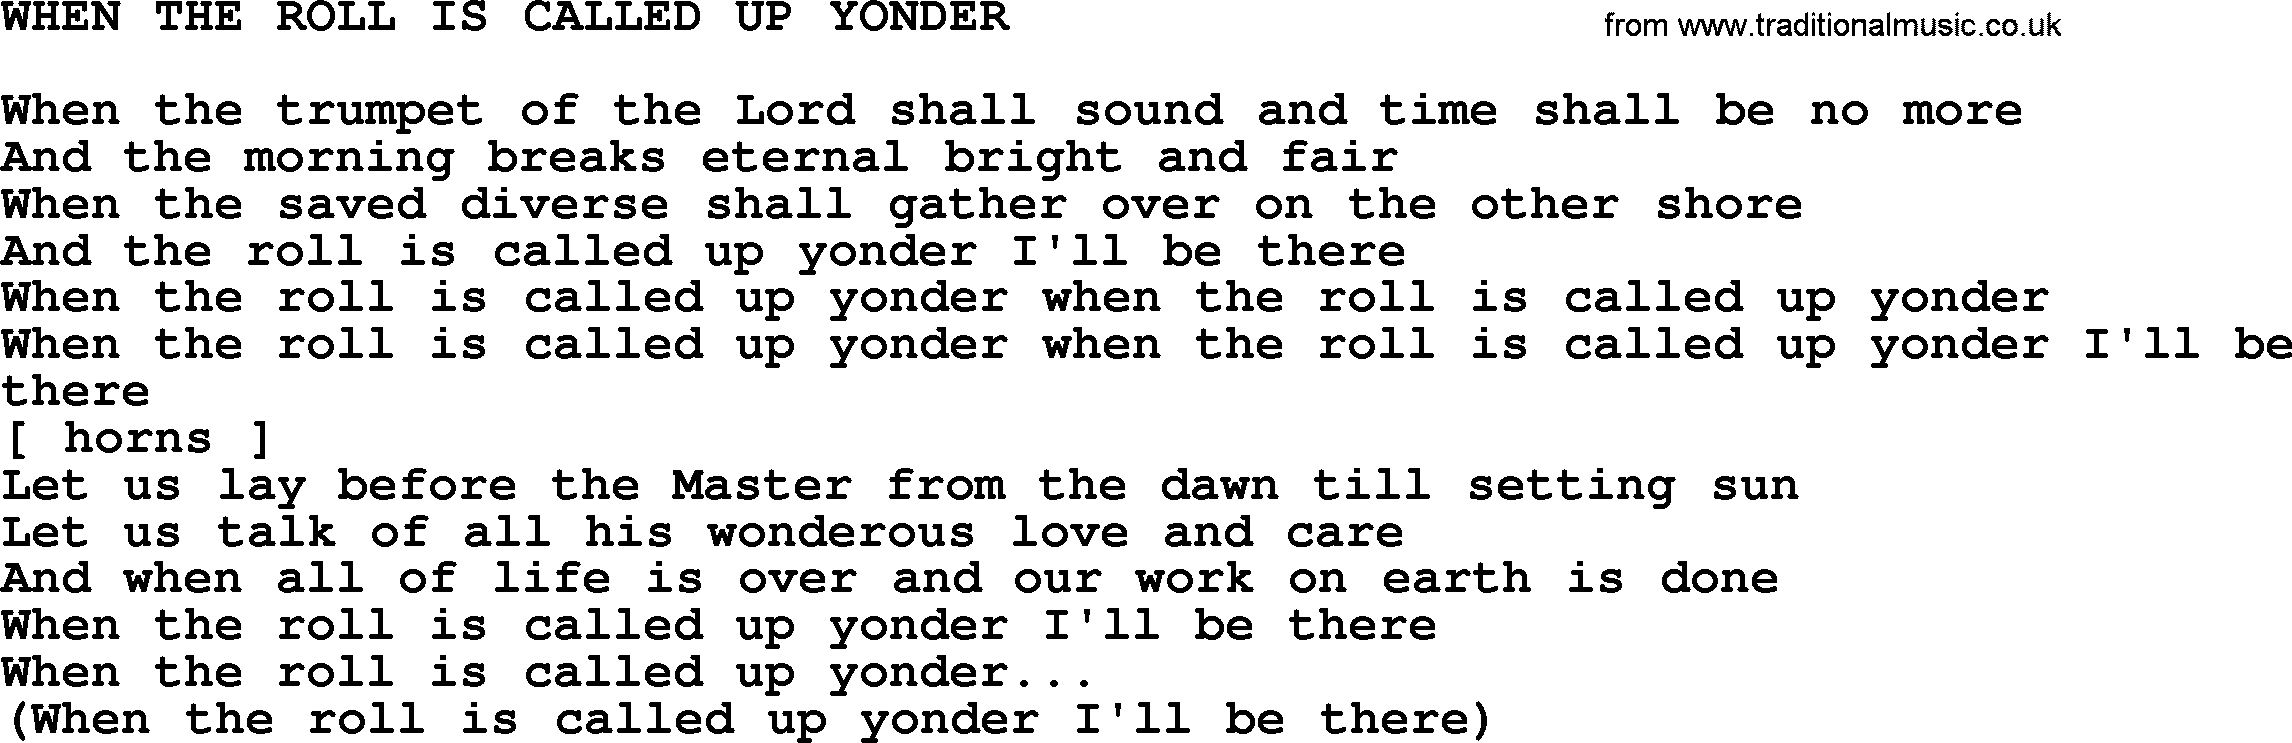 Johnny Cash song When The Roll Is Called Up Yonder.txt lyrics